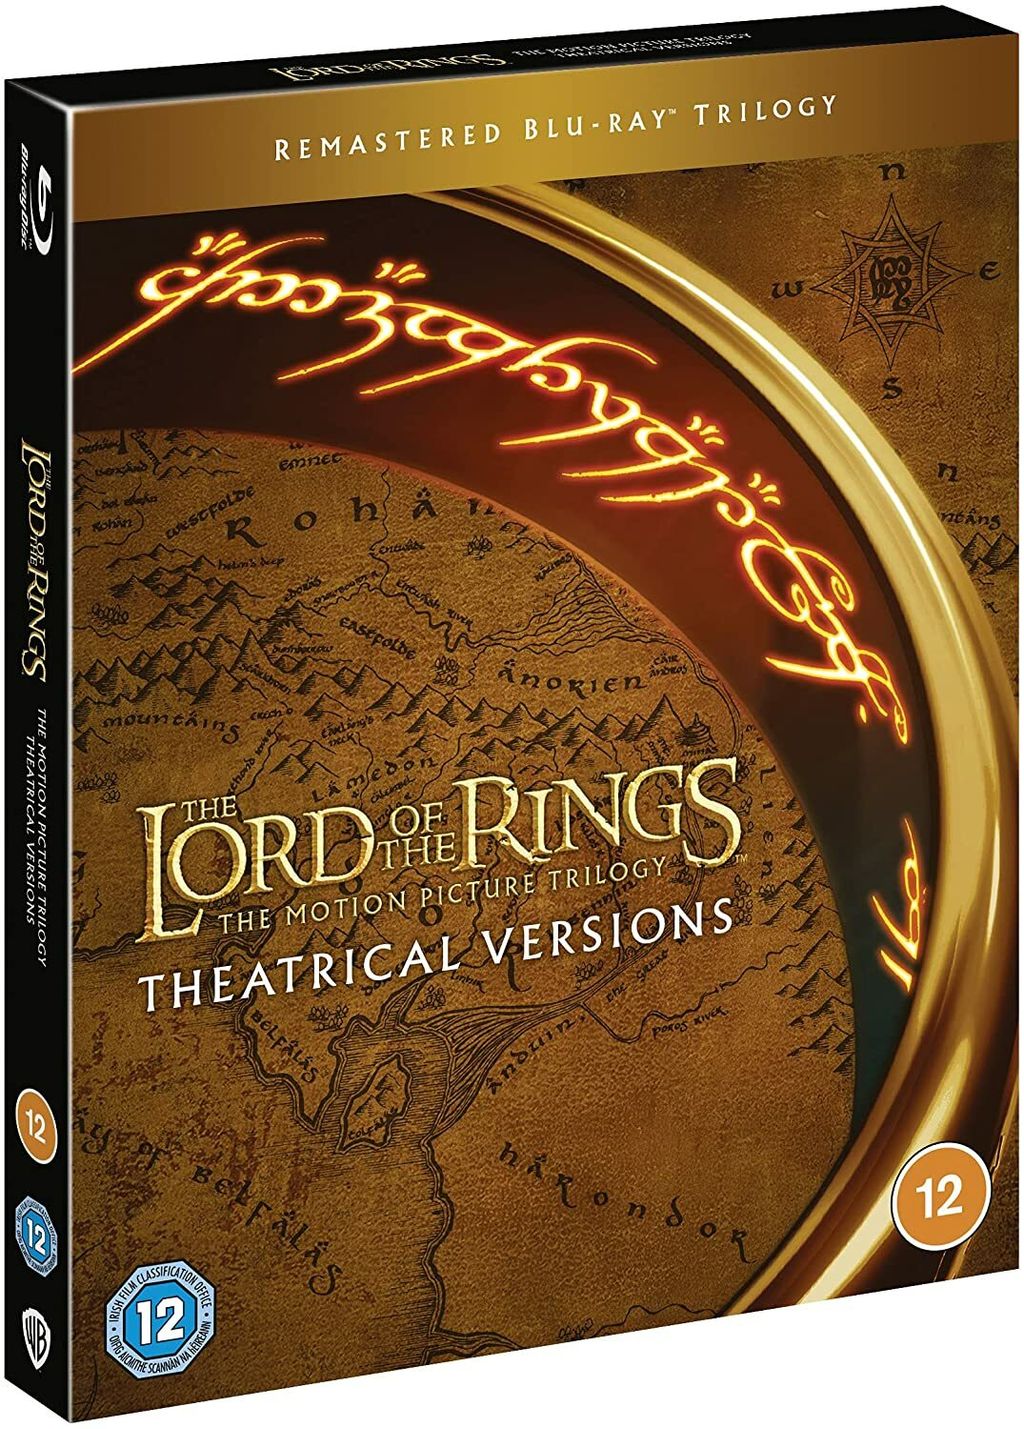 THE LORD OF THE RINGS Trilogy [Blu-ray] 6-discs.jpg